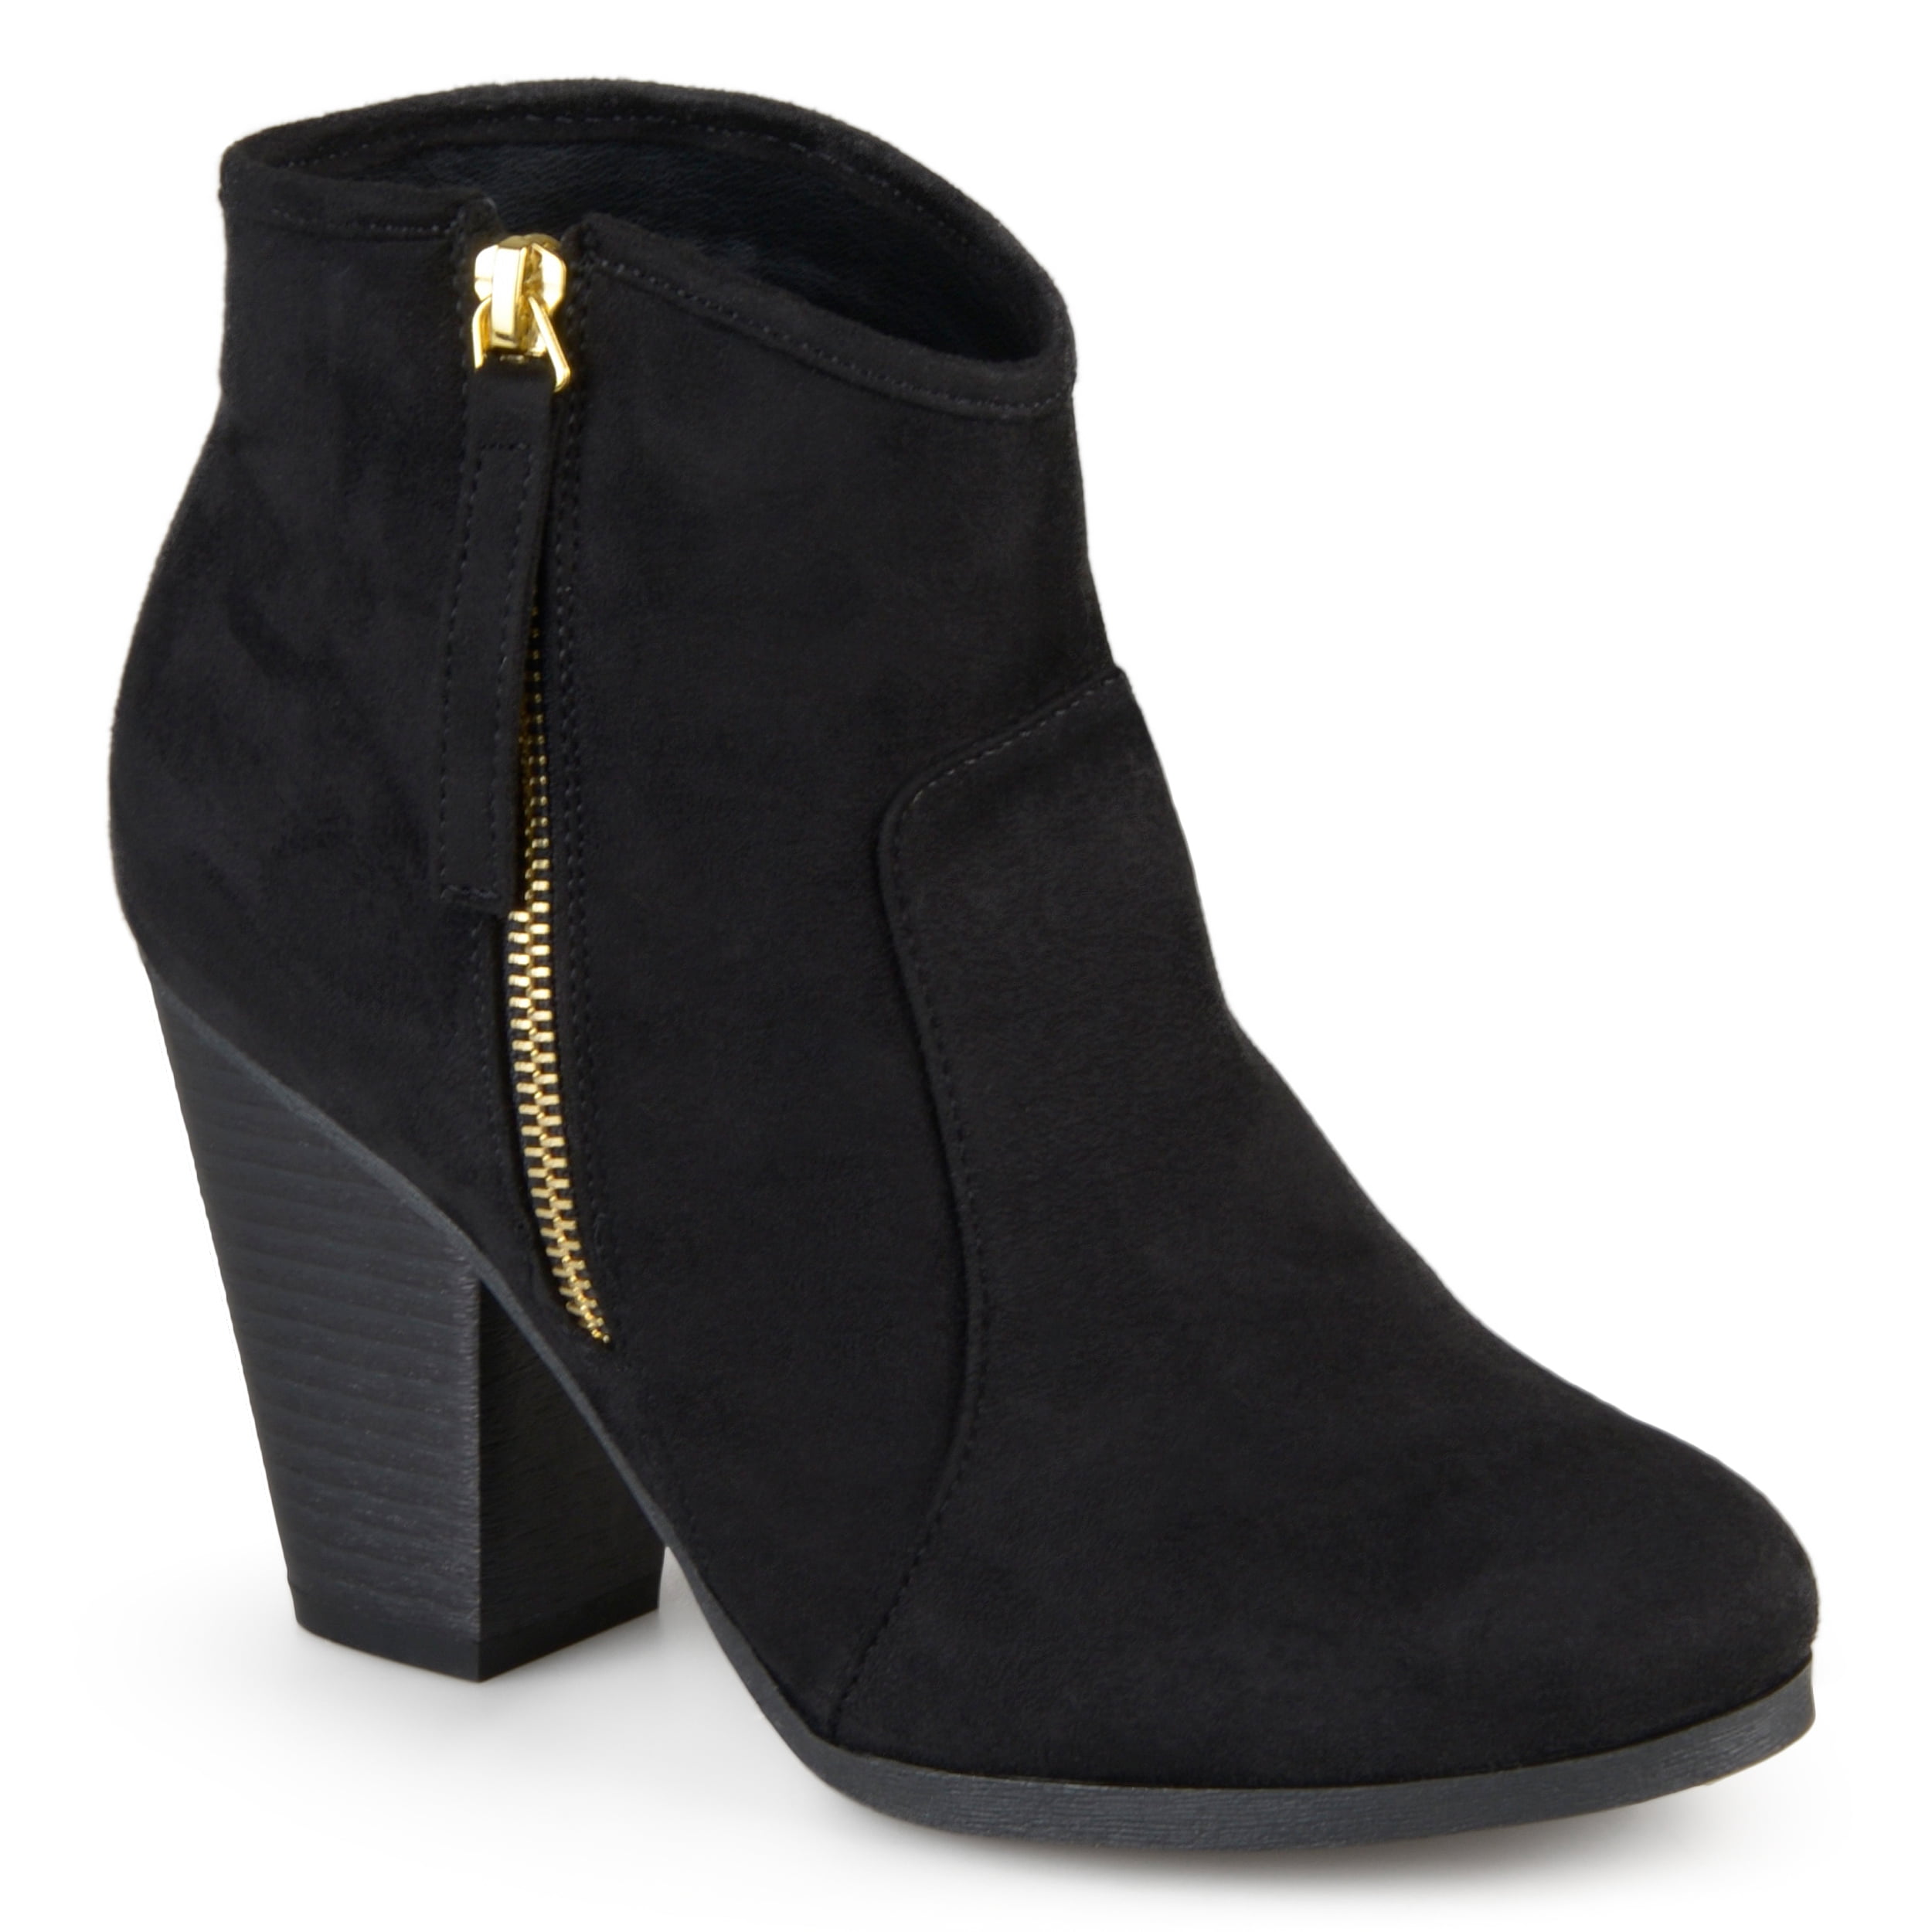 Details about   Women Pointy Toe Suede Fabric Block Heels Ankle Boots Winter Autumn Lady Shoes D